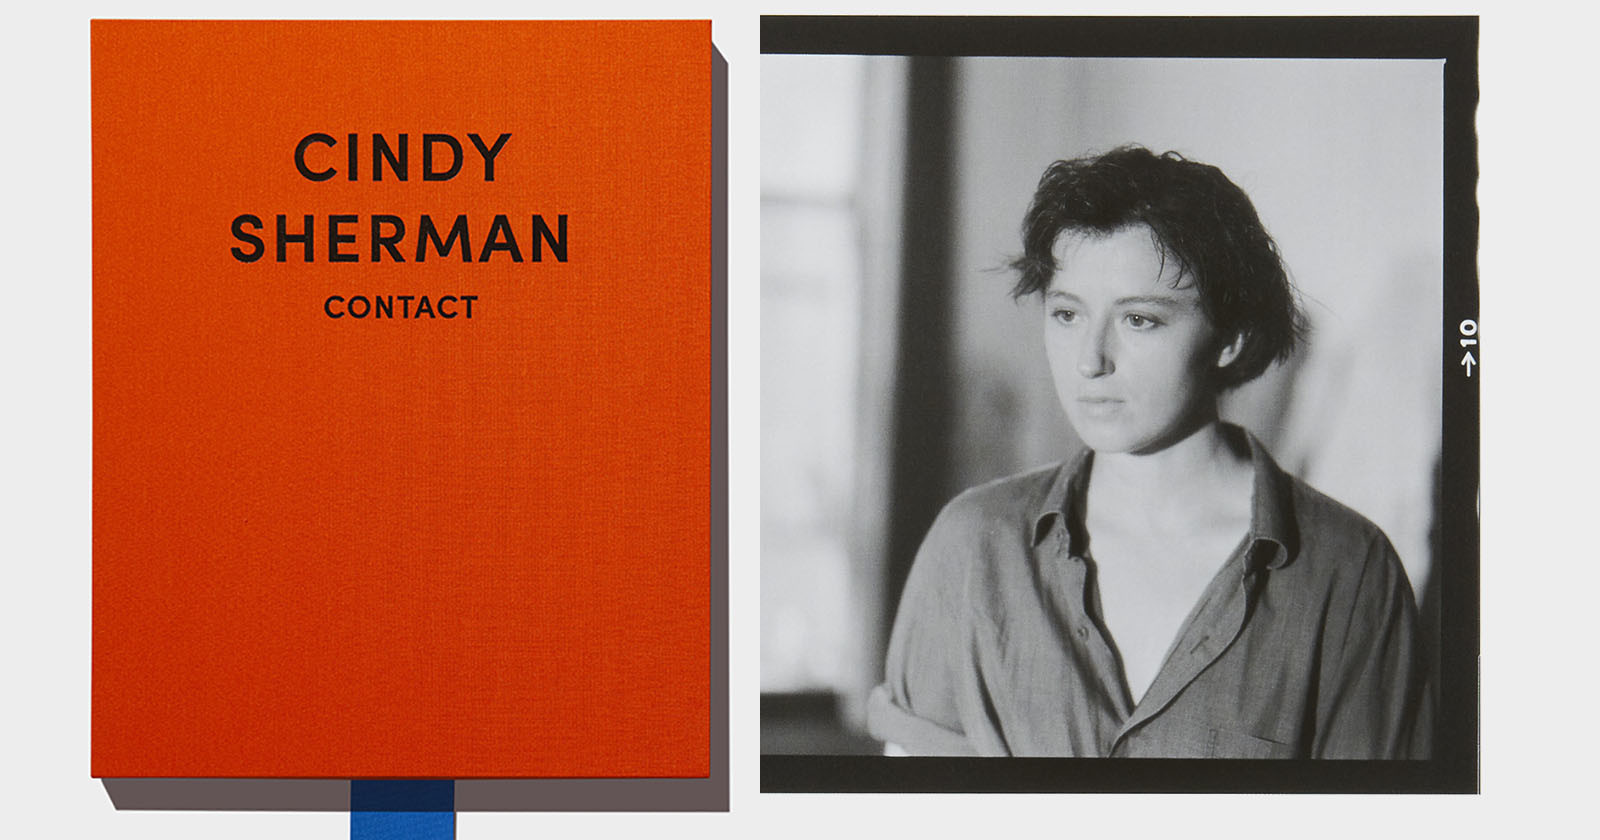 Cindy Sherman in 1985: Photographing the Photographer